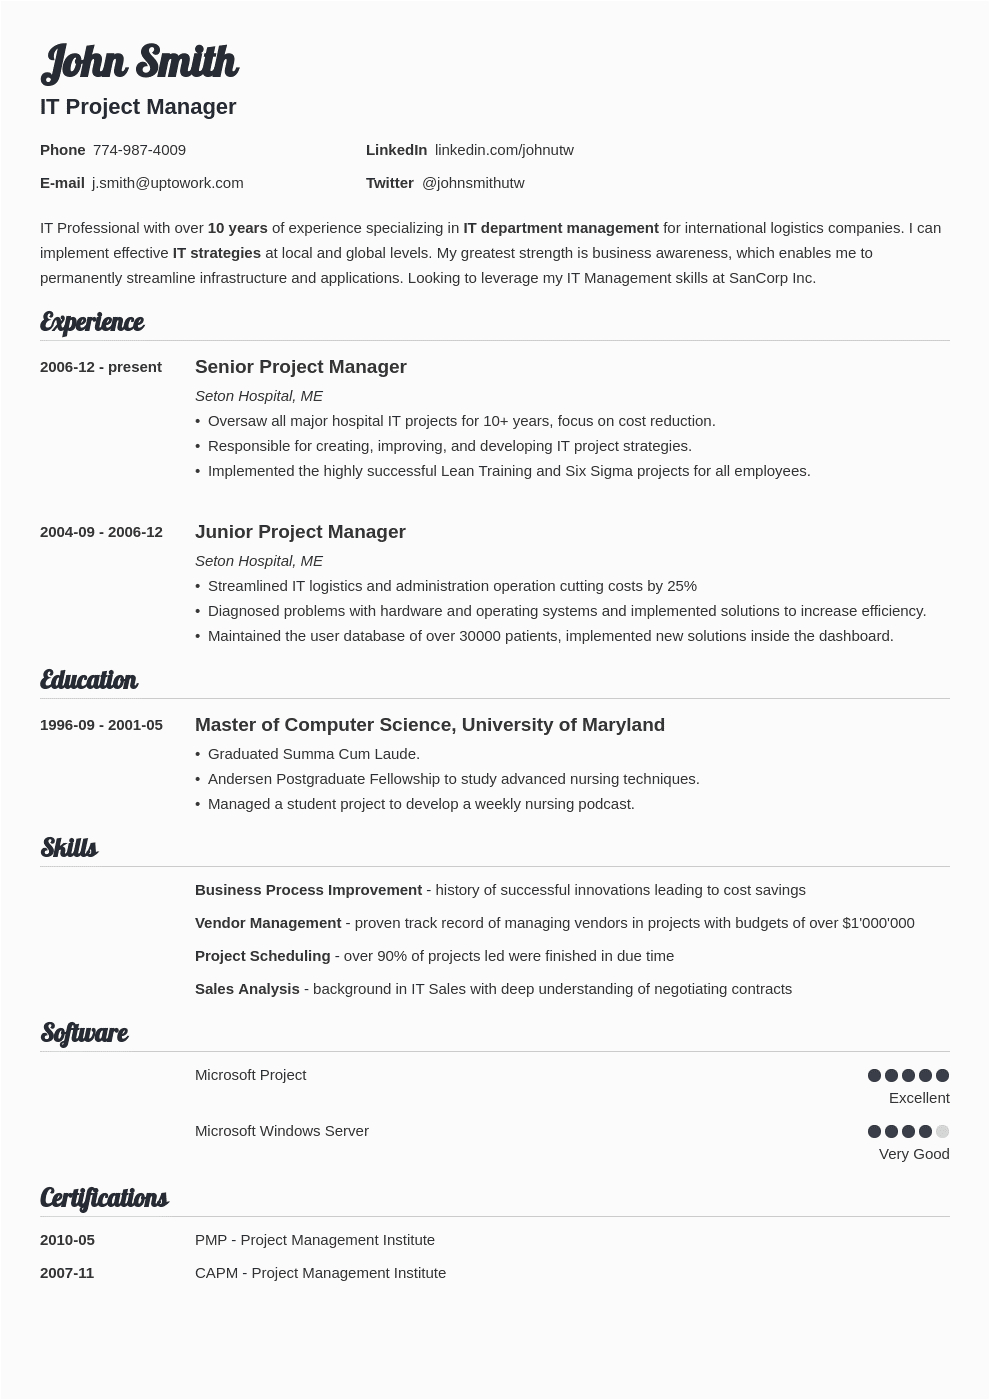 Resume Templates Free Download for Experienced Professionals Modern Resume Template